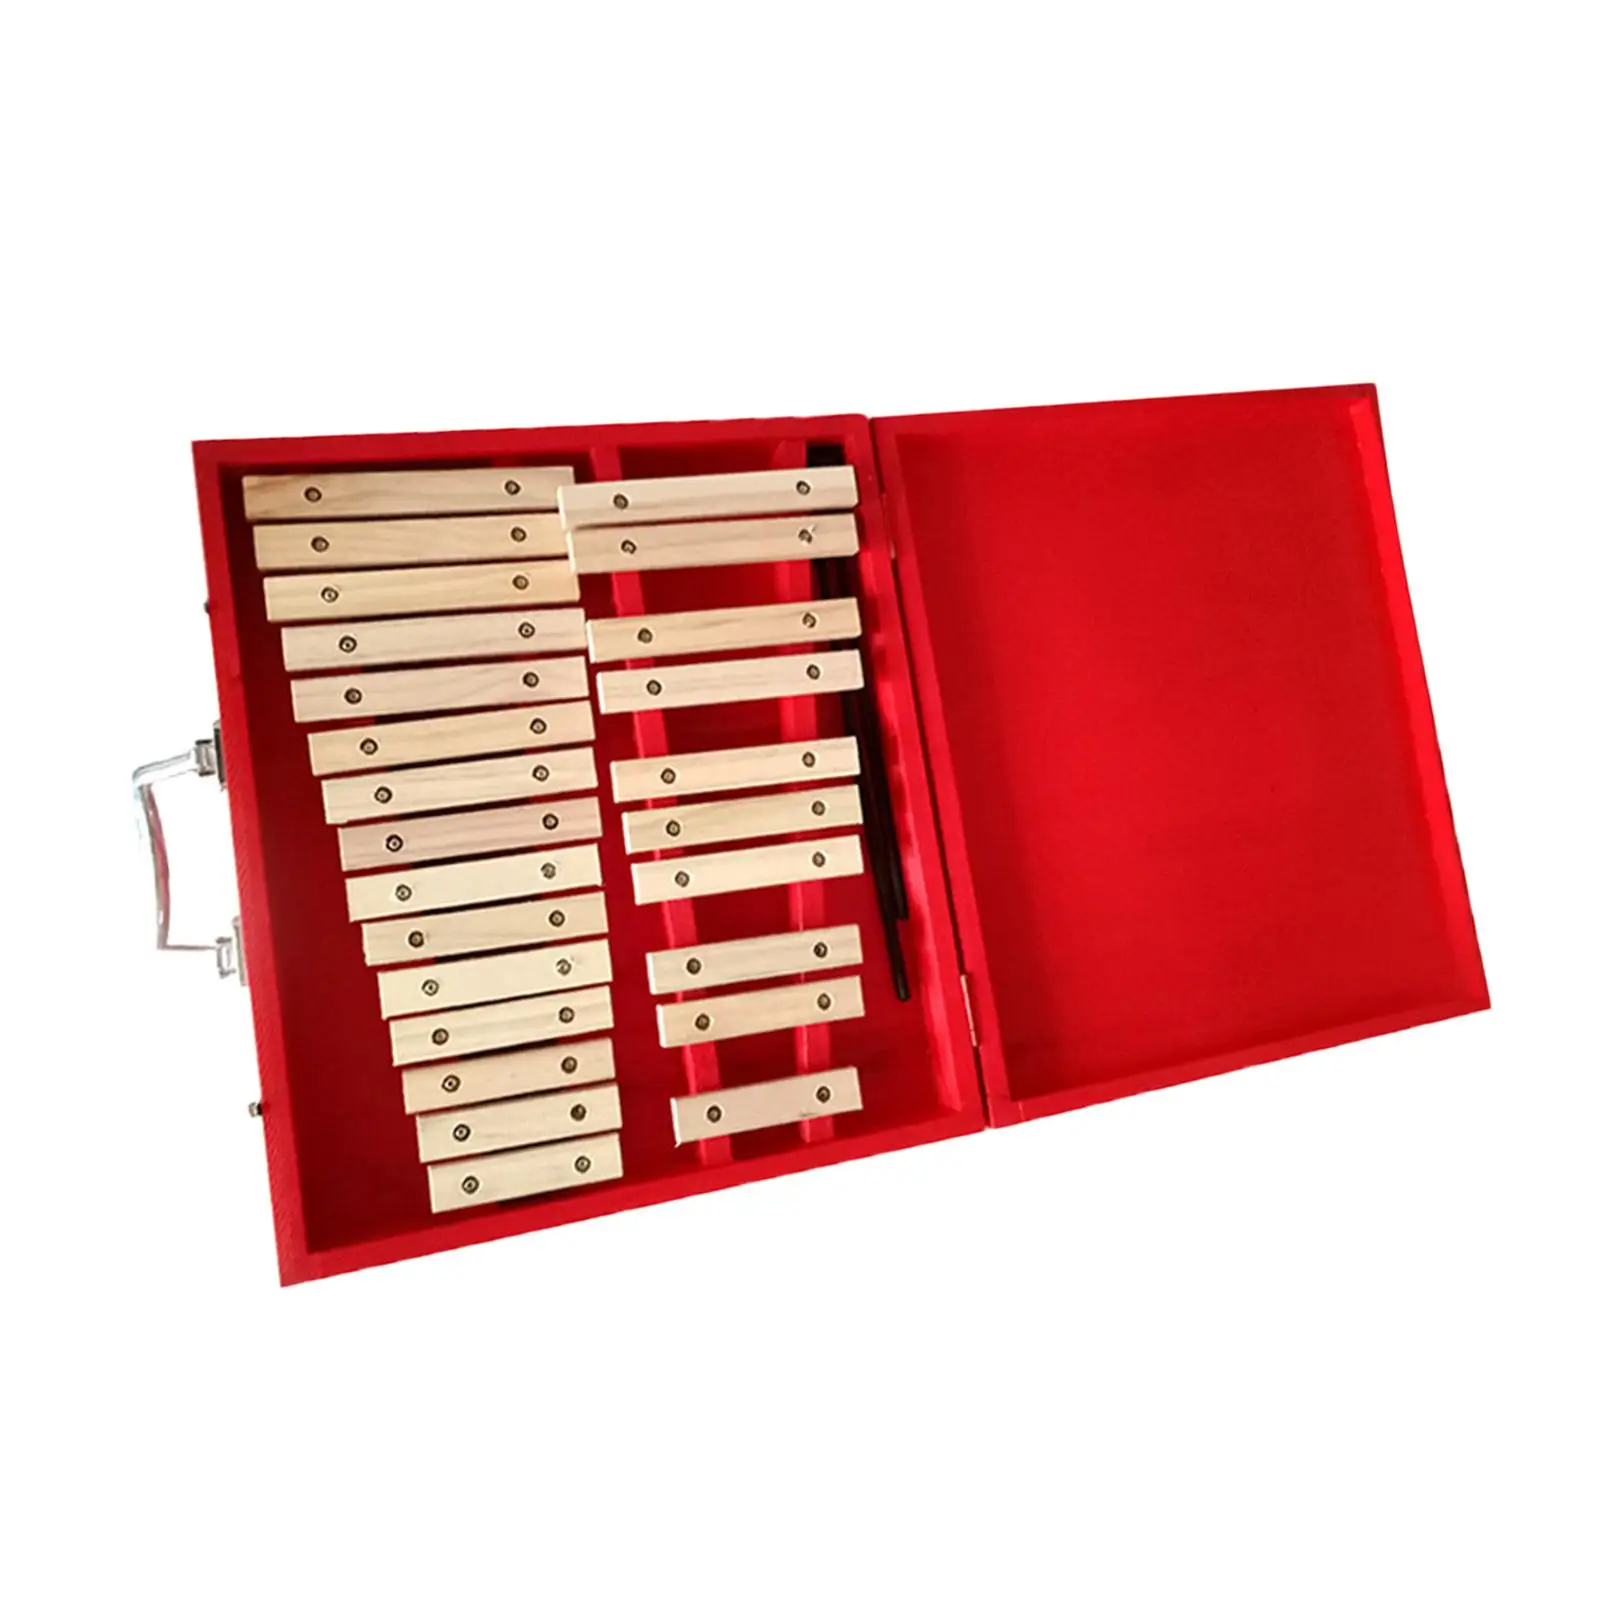 25 Notes Glockenspiel Rainbow 1 2 3 Years Old Musical Instrument for Preschool Christmas Gifts Holiday Present Motor Skills